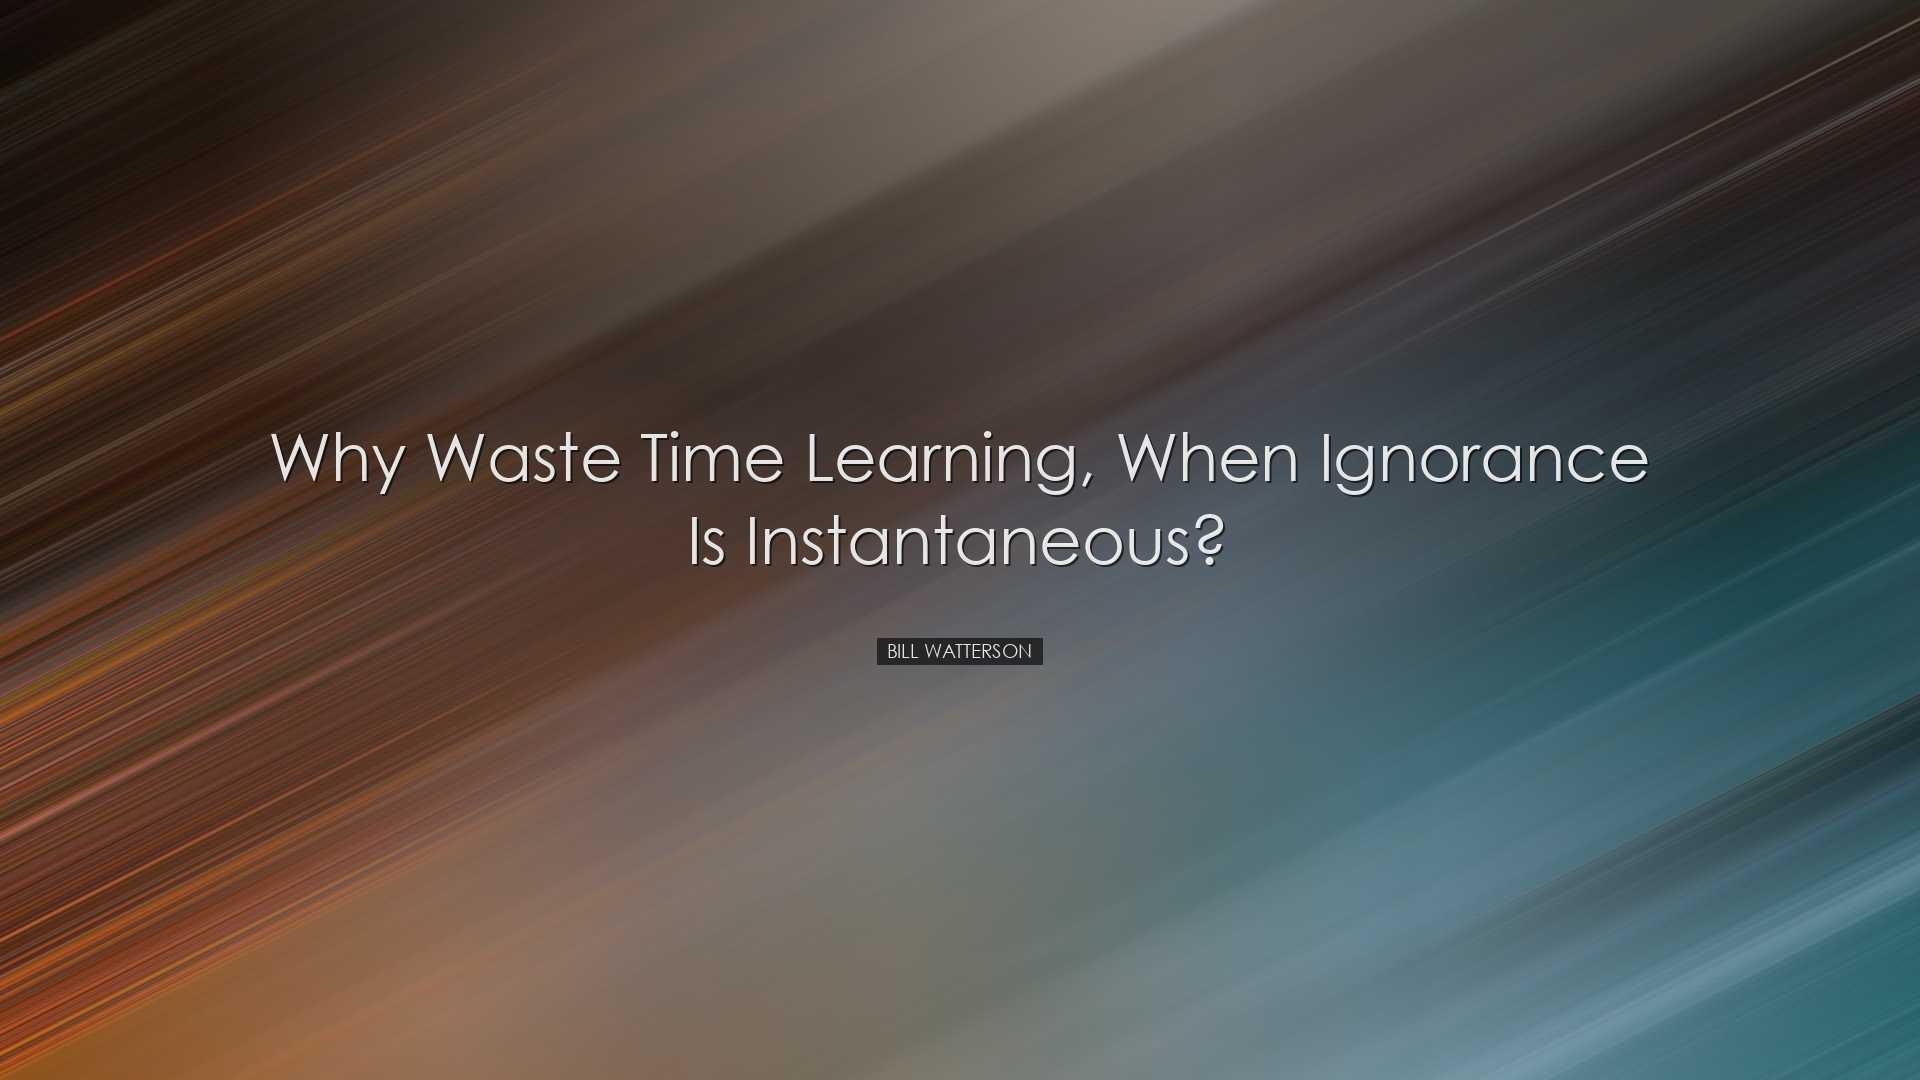 Why waste time learning, when ignorance is instantaneous? - Bill W